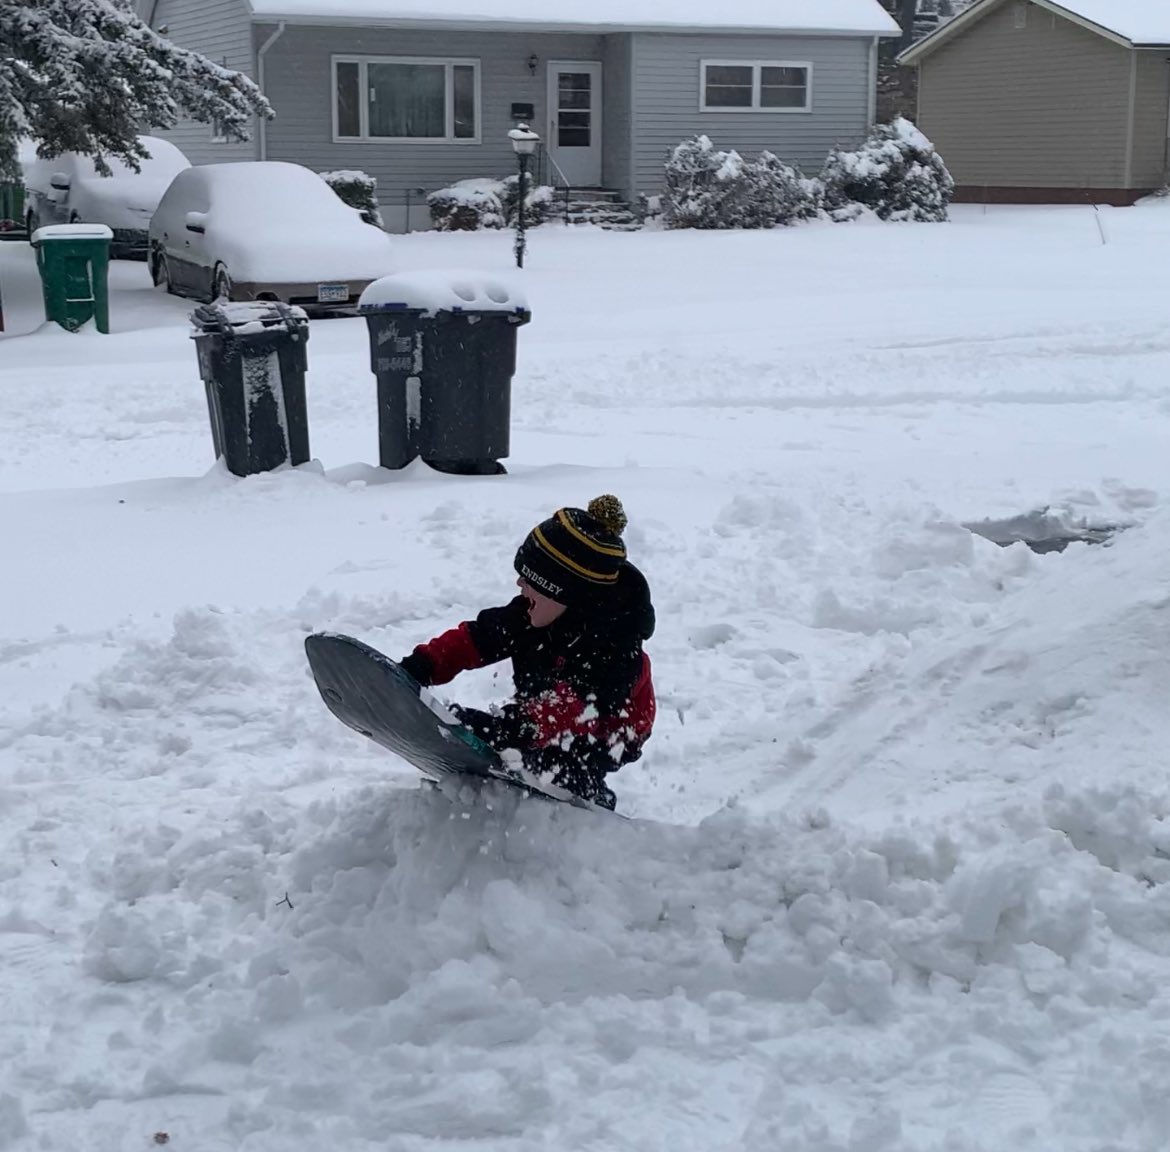 Snow day means building sled jumps in the front yard with the boys!